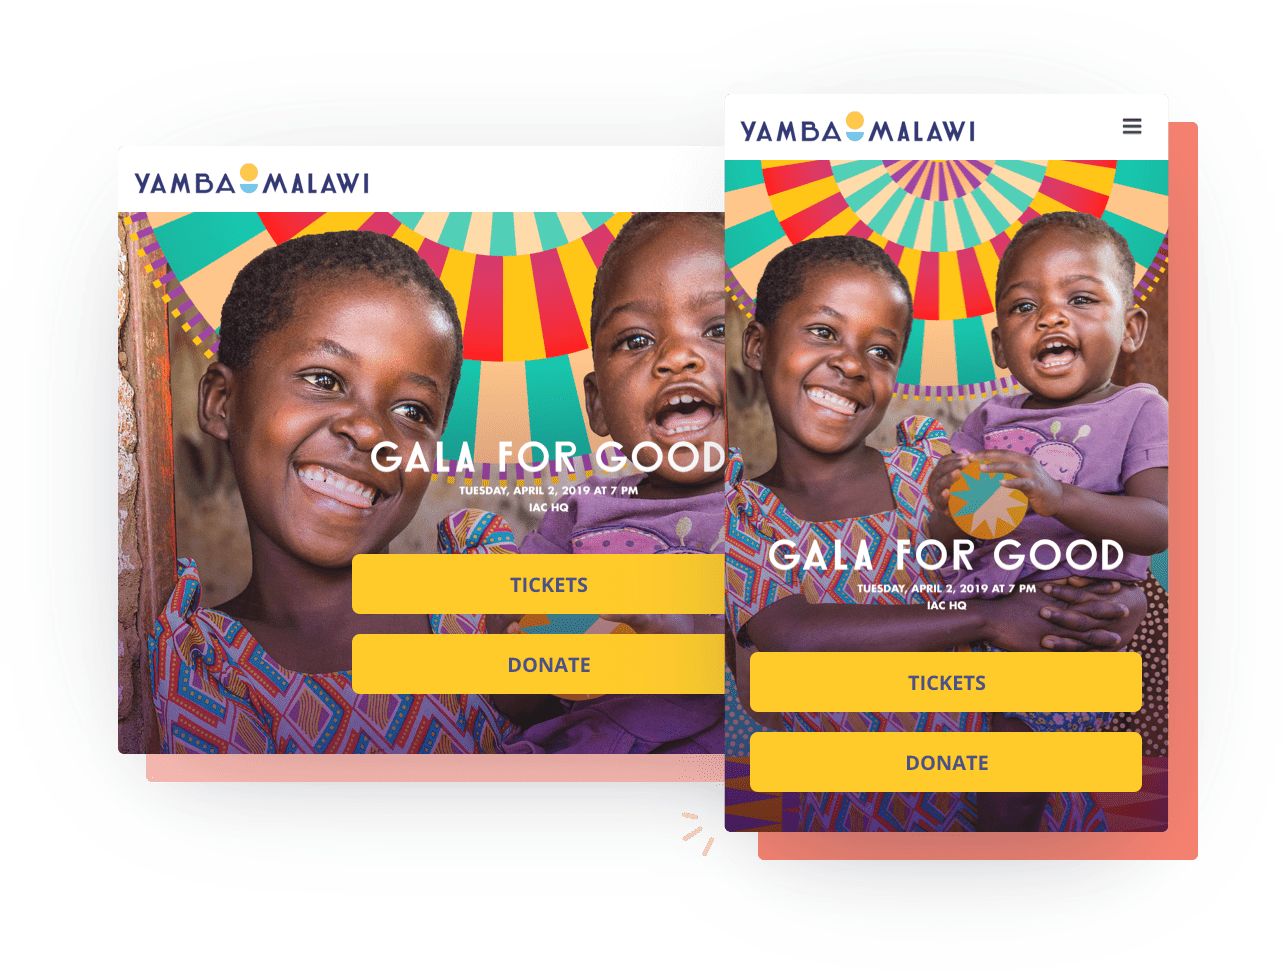 Fundraising event and ticketing solution example showing Yamba Malawi Gala for Good event page on both desktop and mobile screens